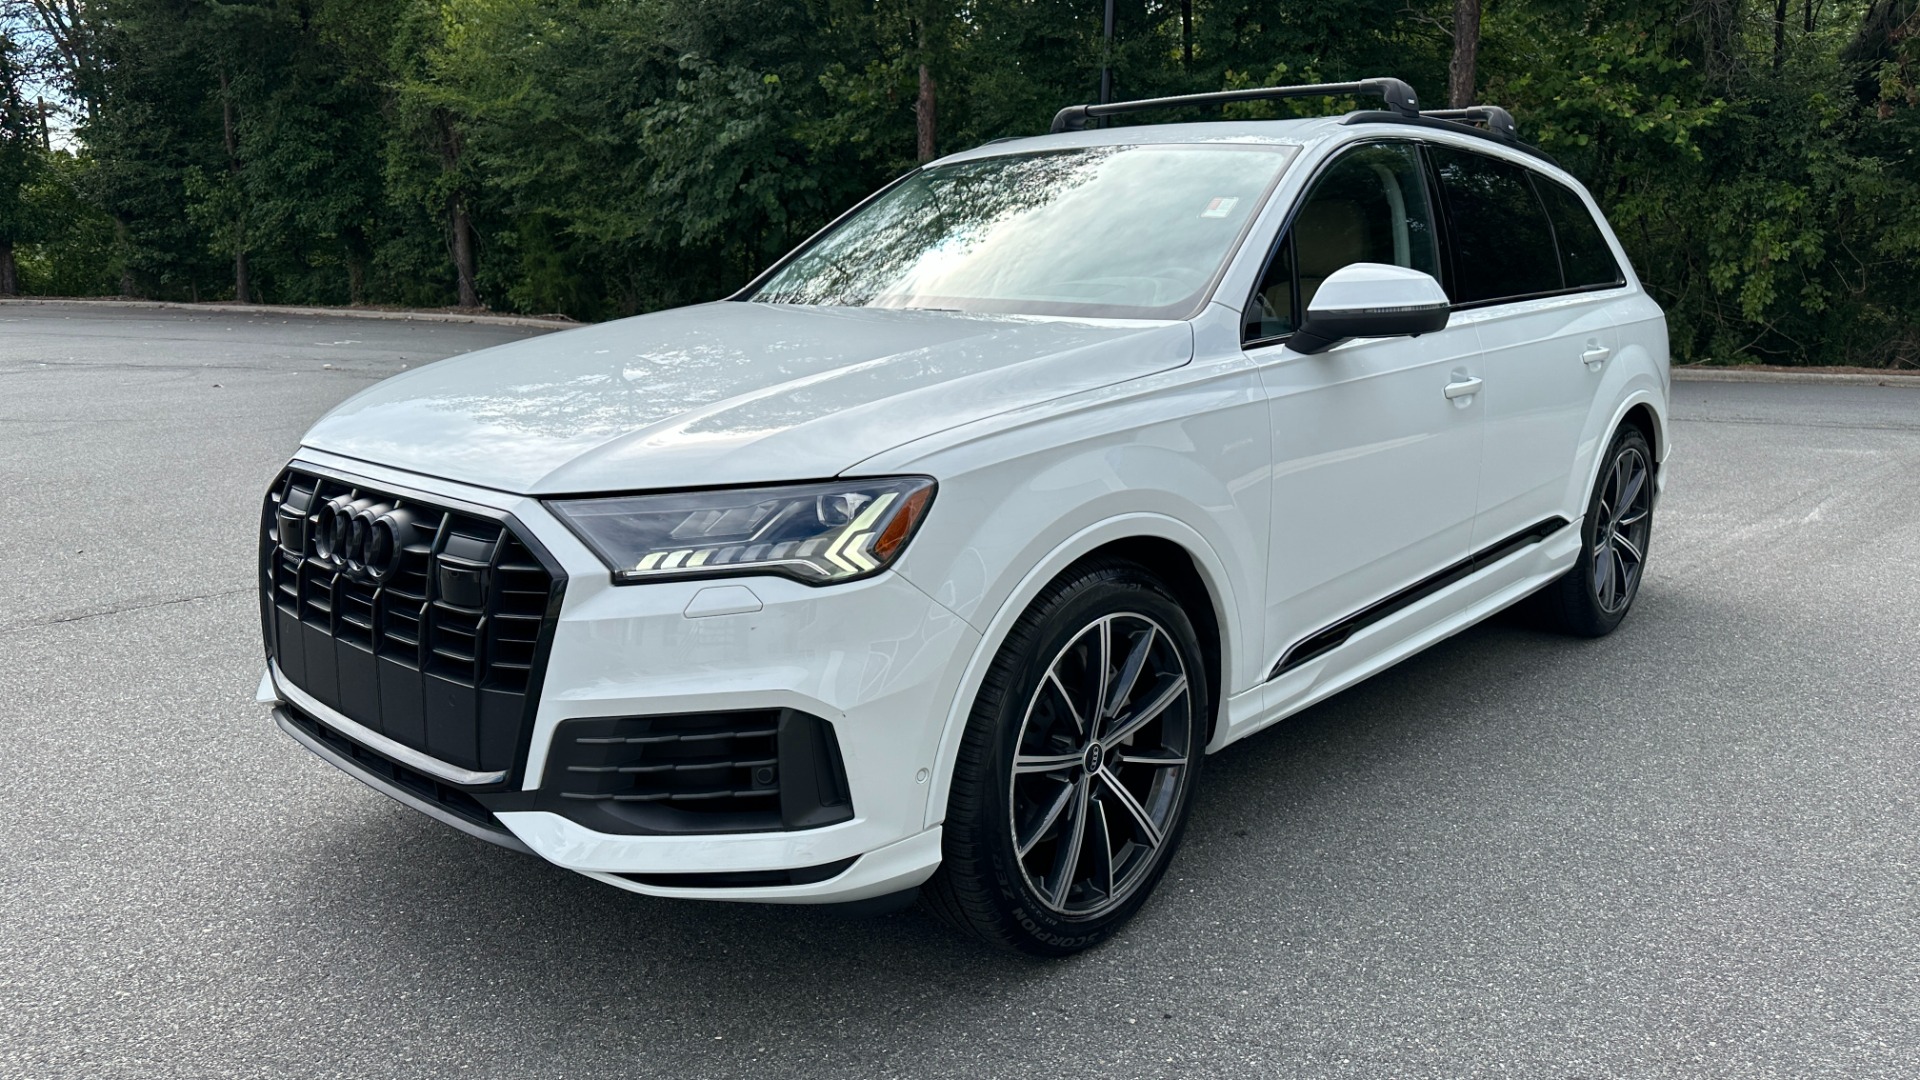 Used 2021 Audi Q7 PRESTIGE / BLACK OPTIC / BLACK EMBLEMS / TOWING PACKAGE for sale $54,500 at Formula Imports in Charlotte NC 28227 5